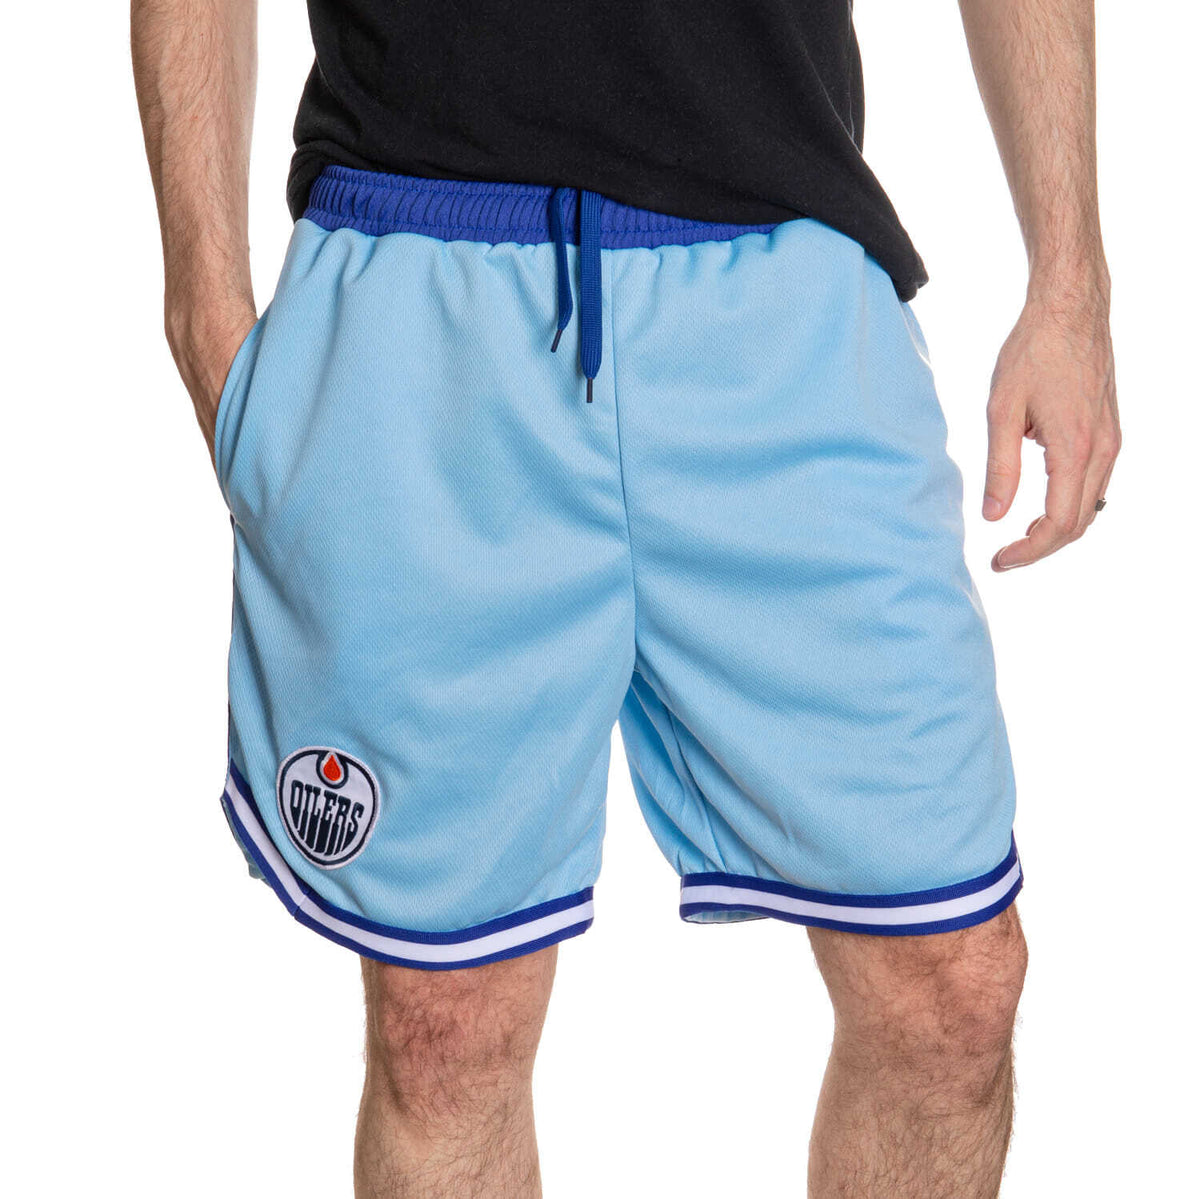 Edmonton Oilers Men's 2 Tone Air Mesh Shorts Lined with Pockets